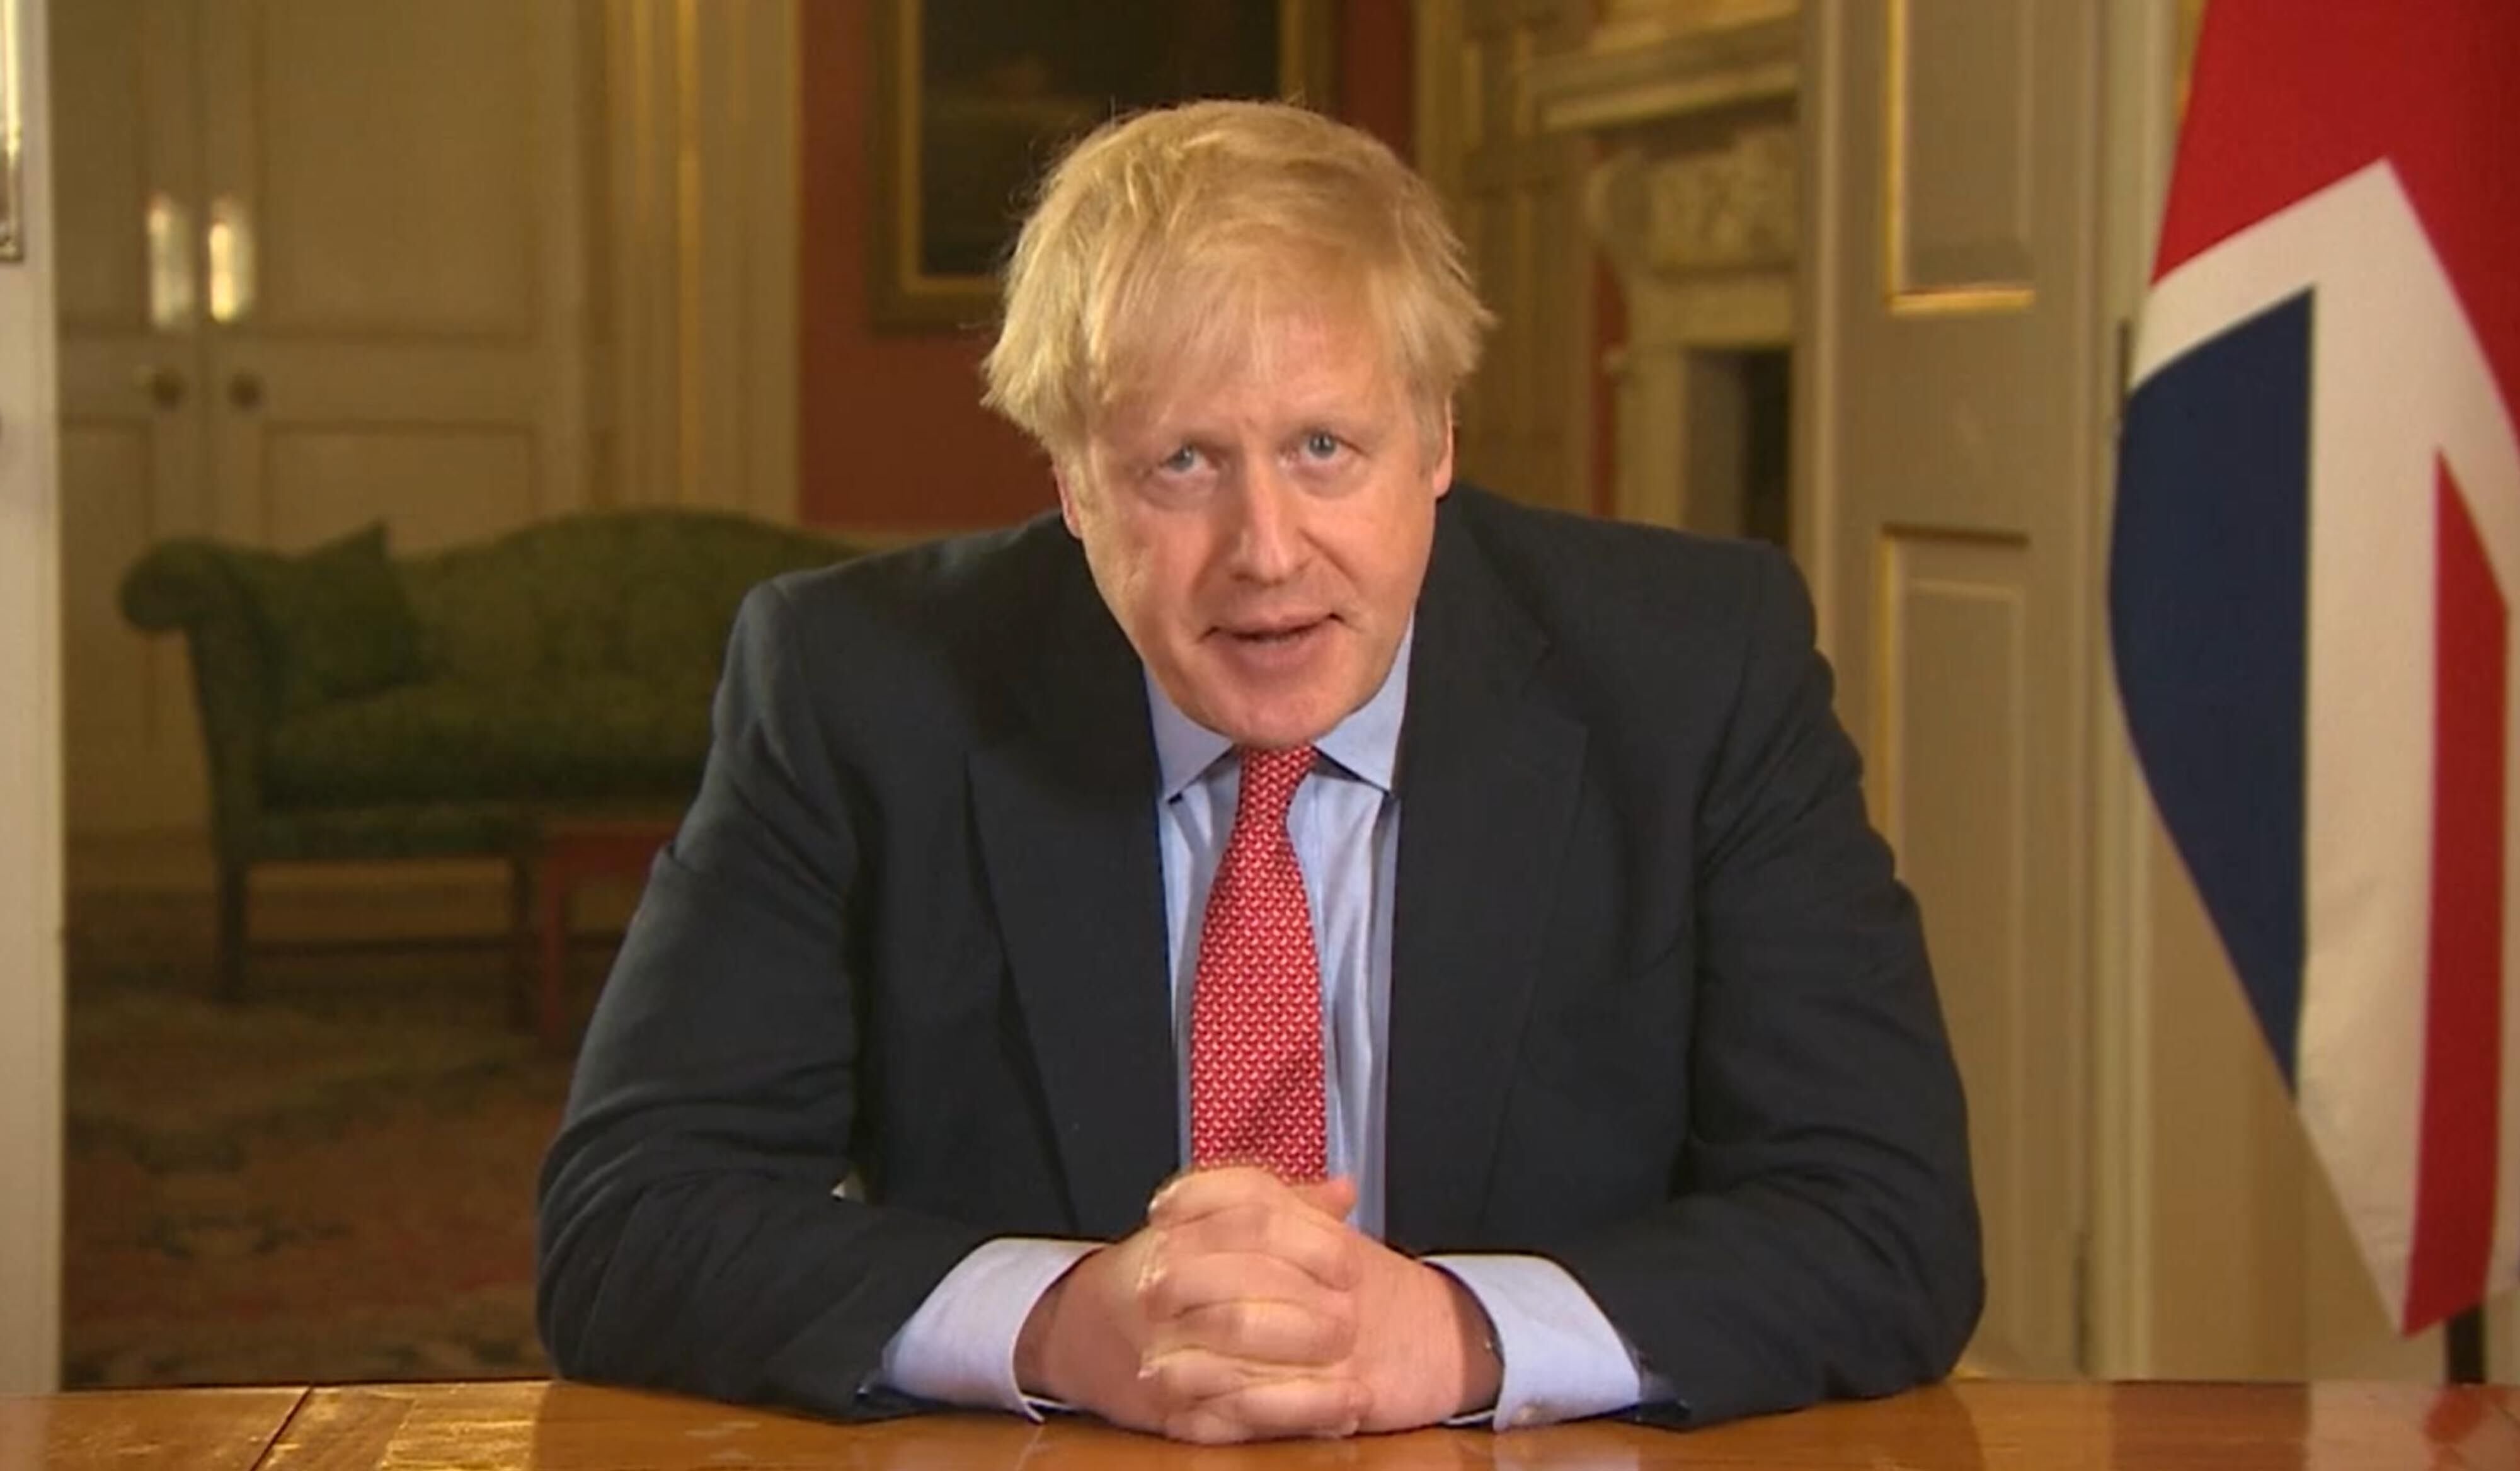 Prime Minister Boris Johnson addressing the nation from 10 Downing Street, London, as he placed the UK on lockdown amid the coronavirus (COVID-19) | Photo: Getty Images